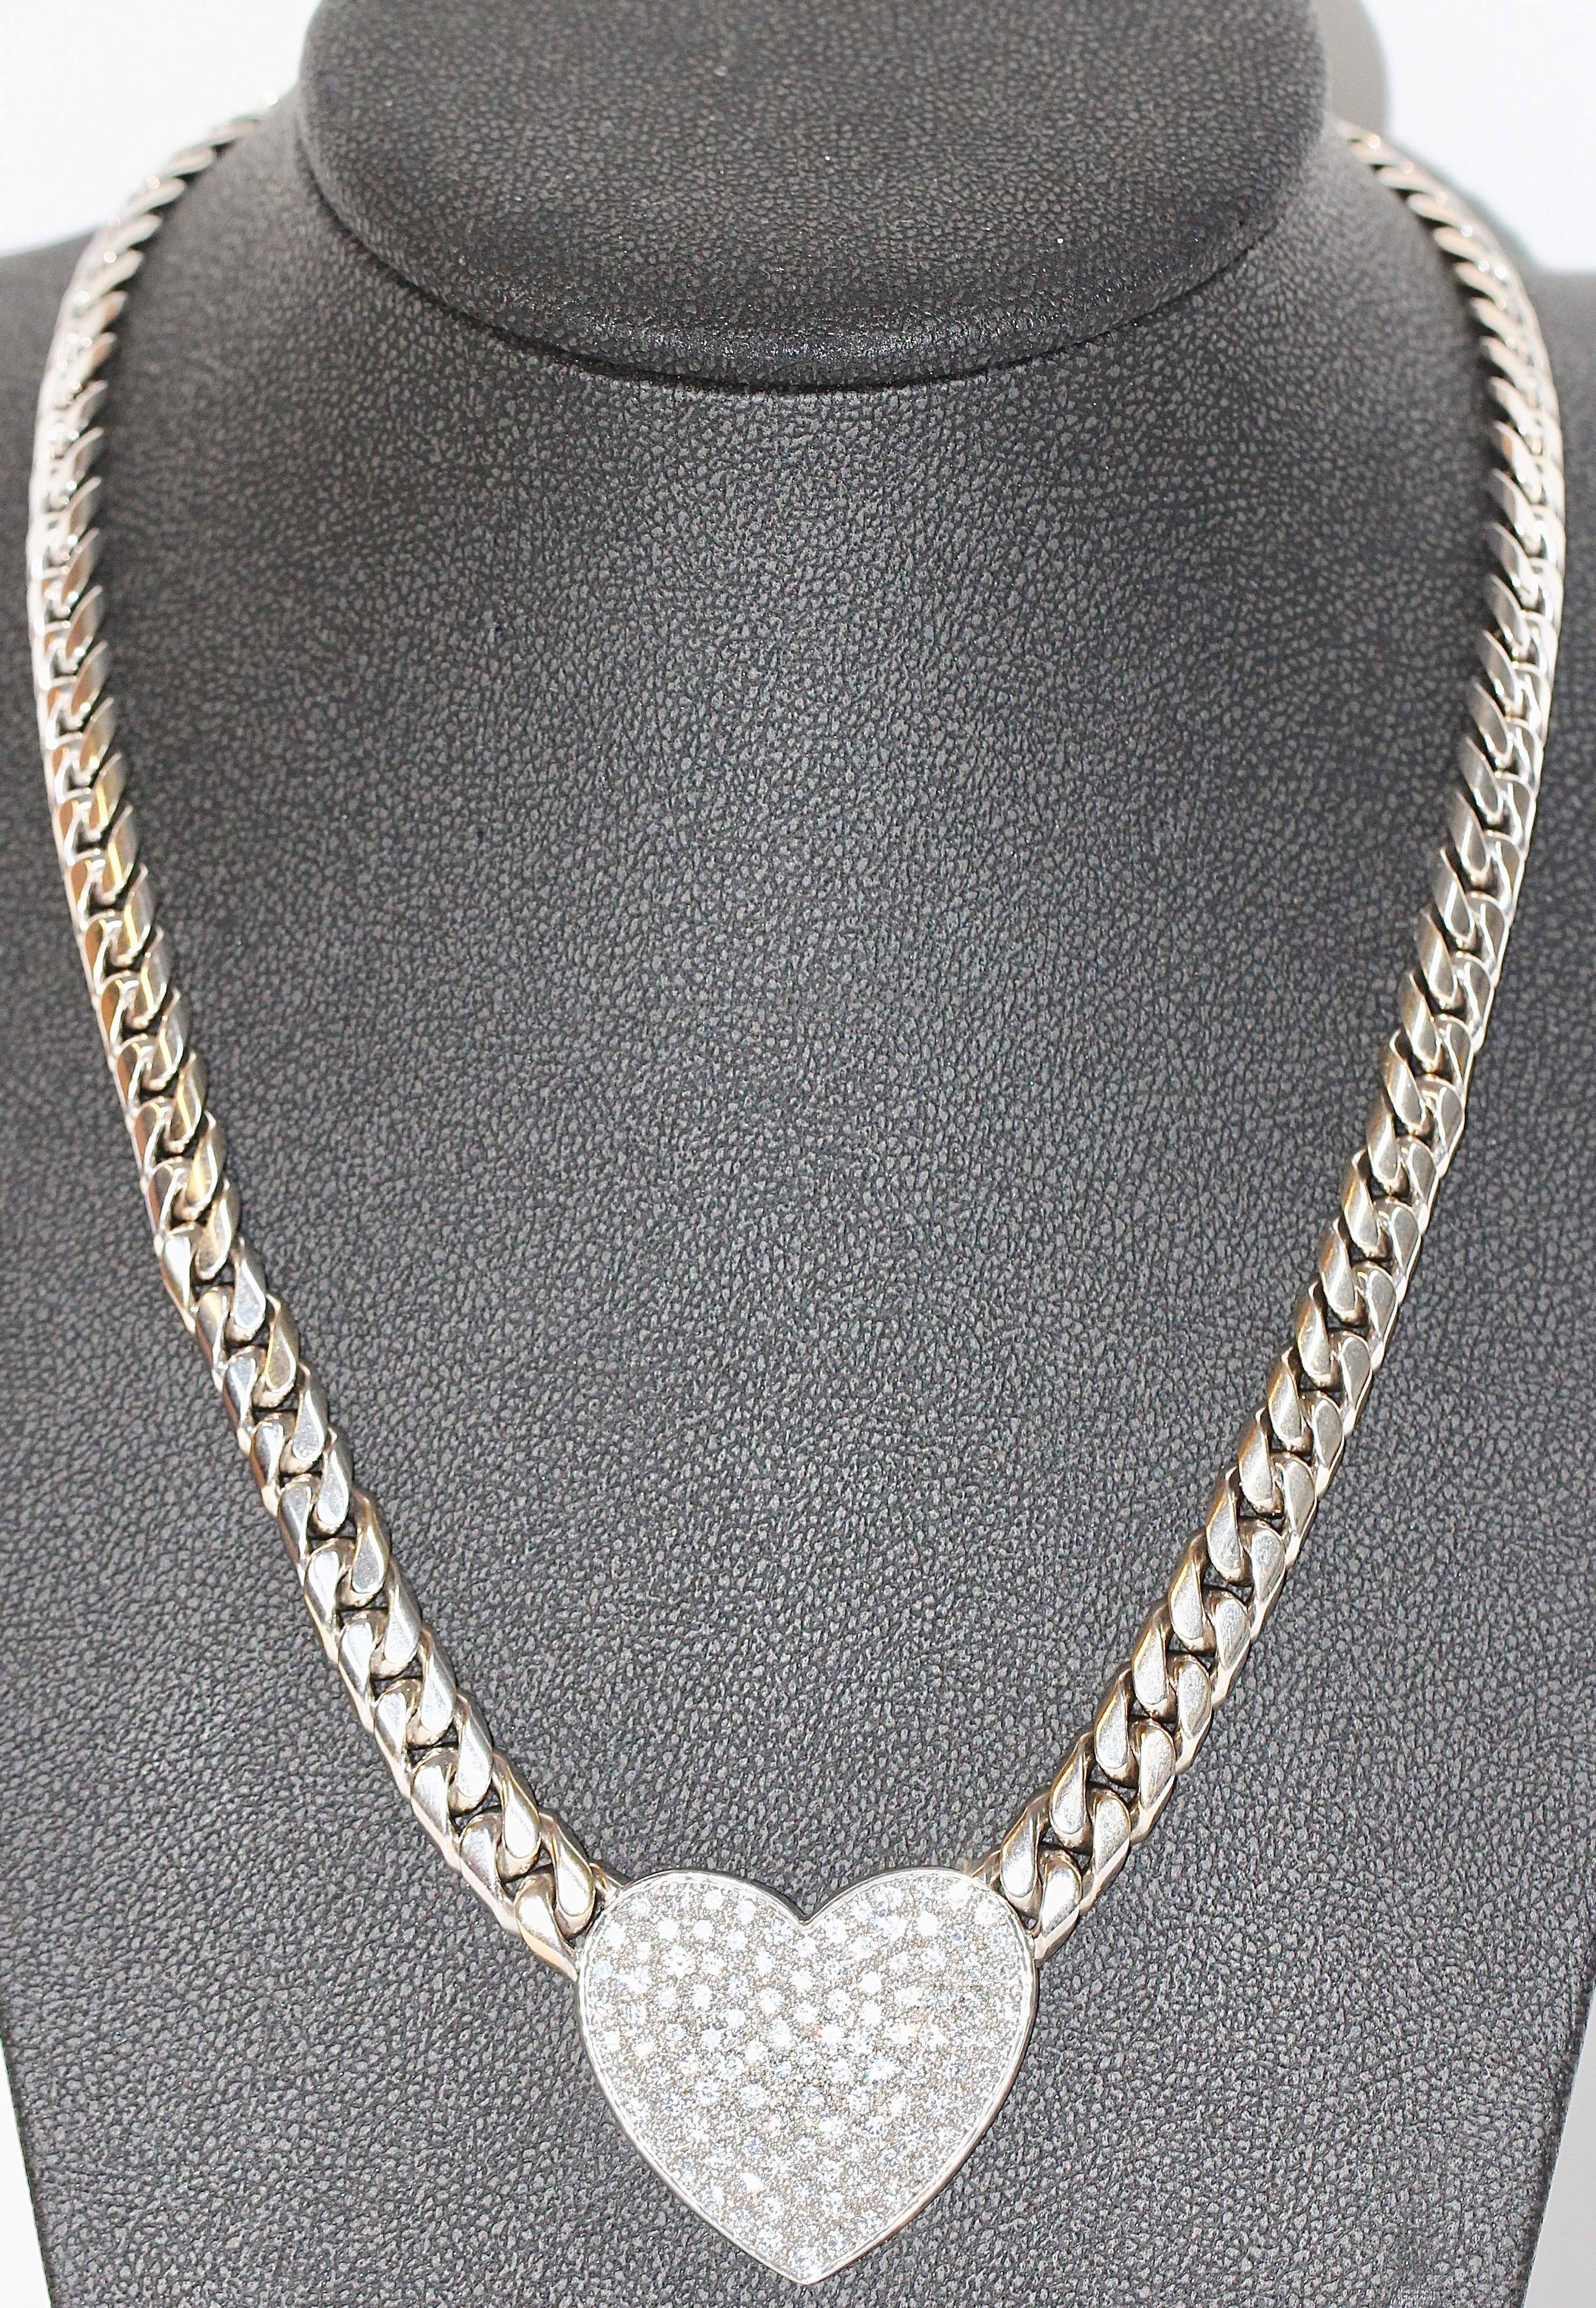 Beautiful white gold necklace with 120 diamonds.

Luxury white gold necklace with a large heart-shaped pendant with 120 diamonds in top quality.

18K solid white gold.

Size of the Heart 35.5 x 32 mm.